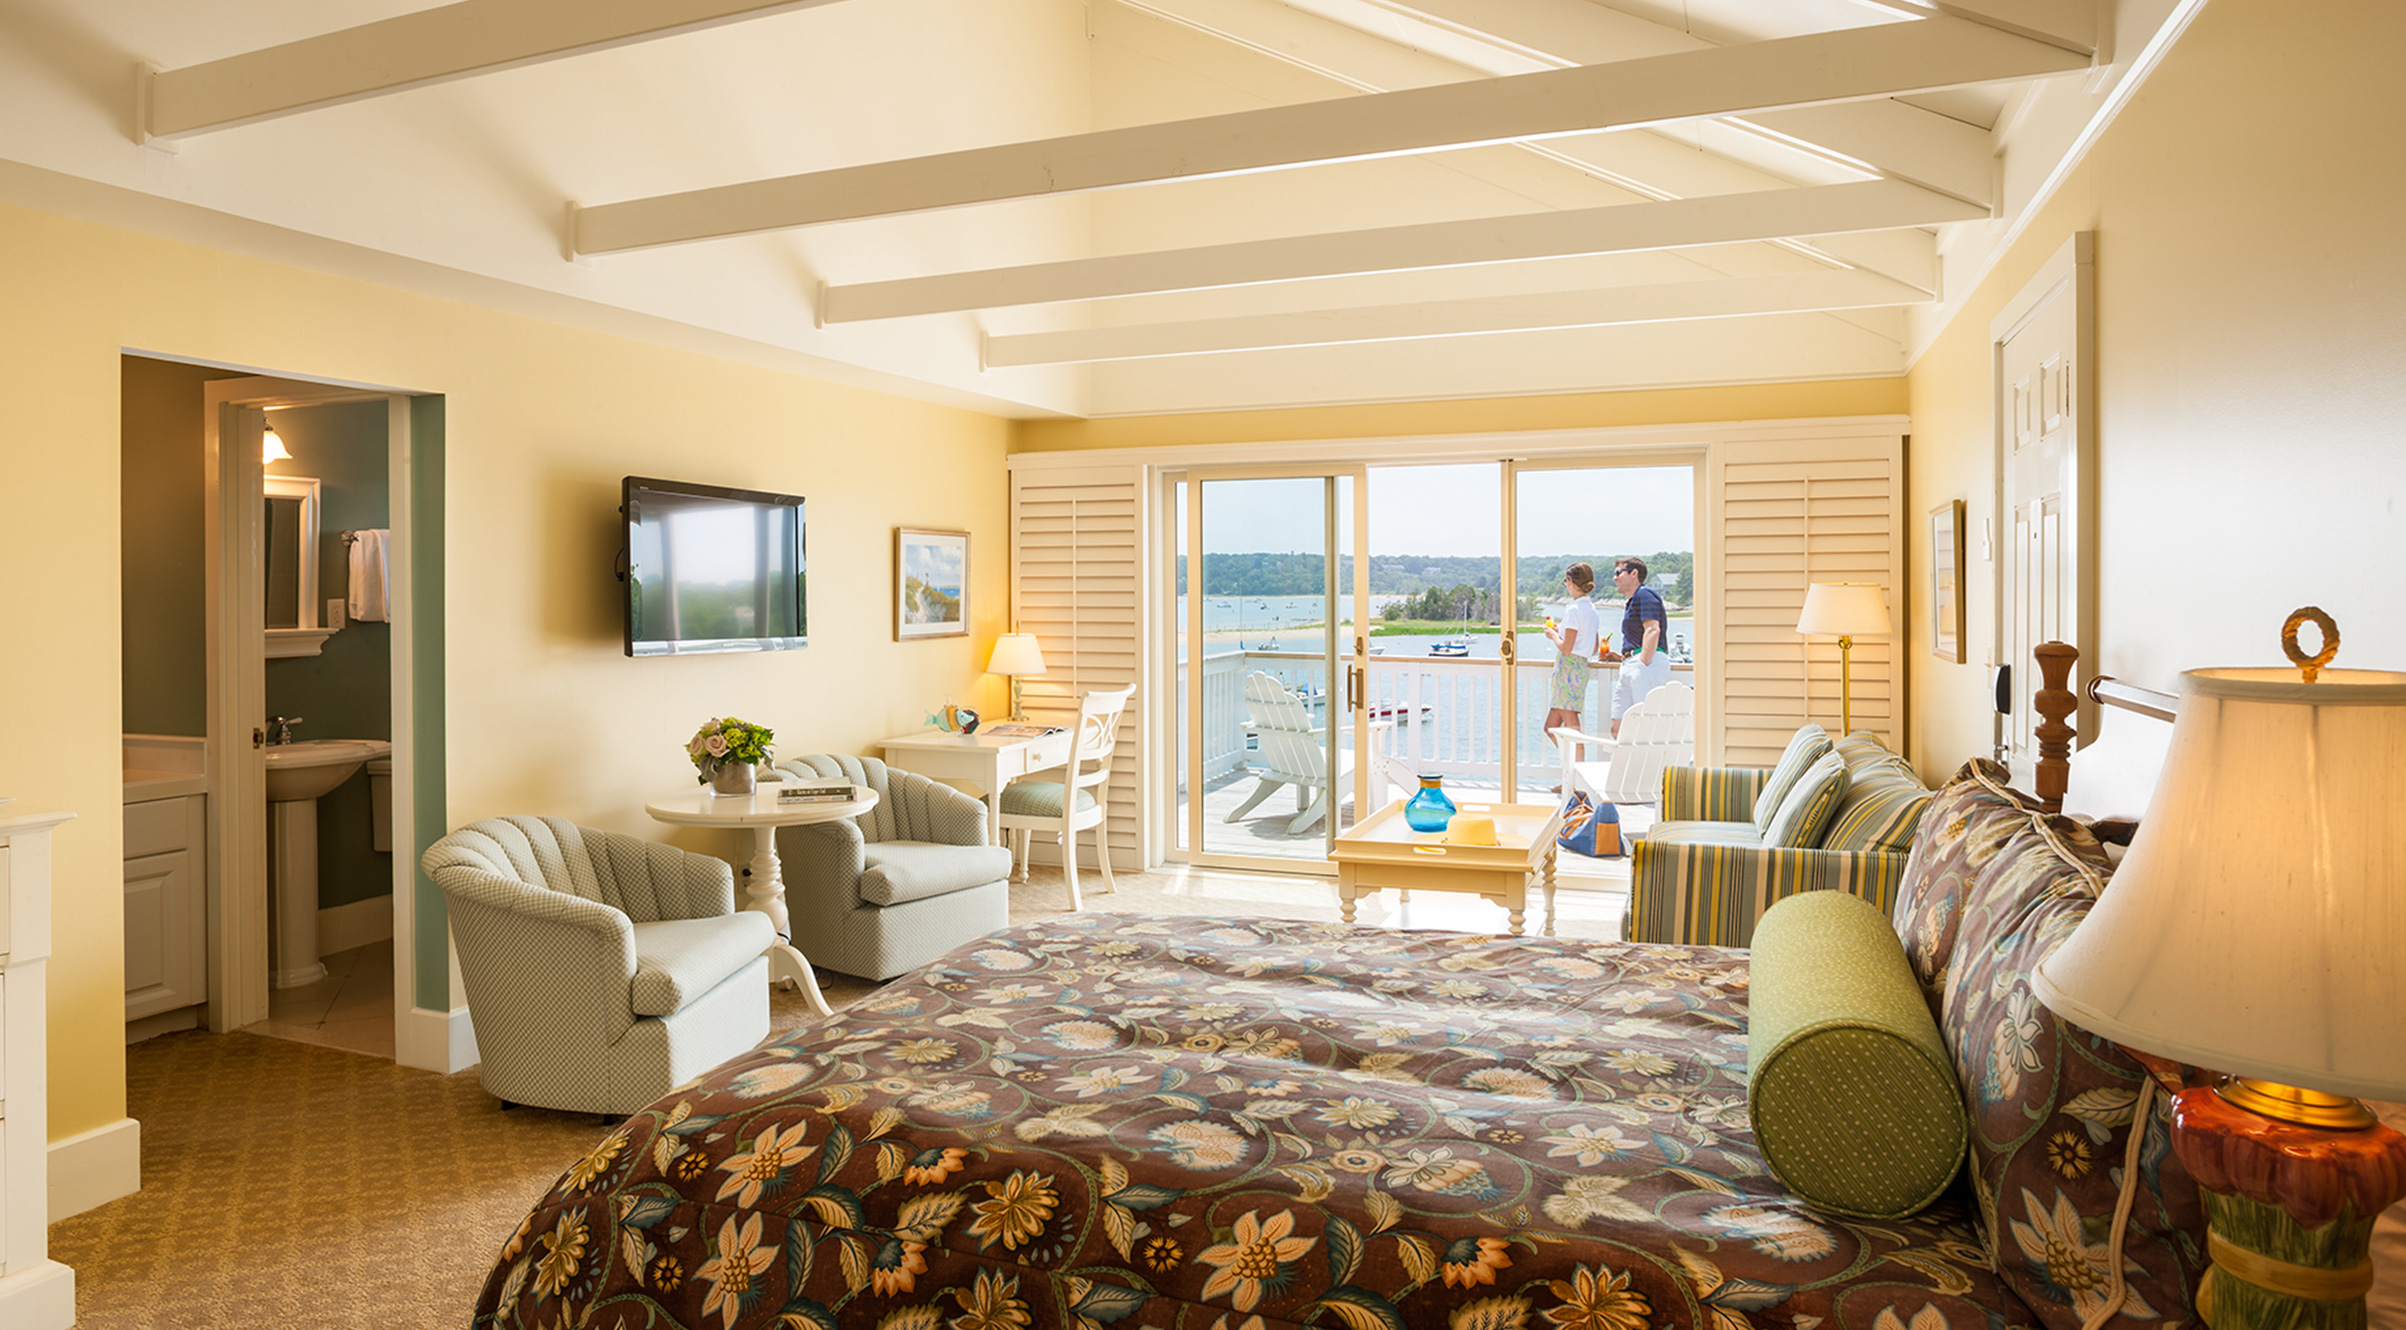 Cottage style water view room at Cape Cod resort